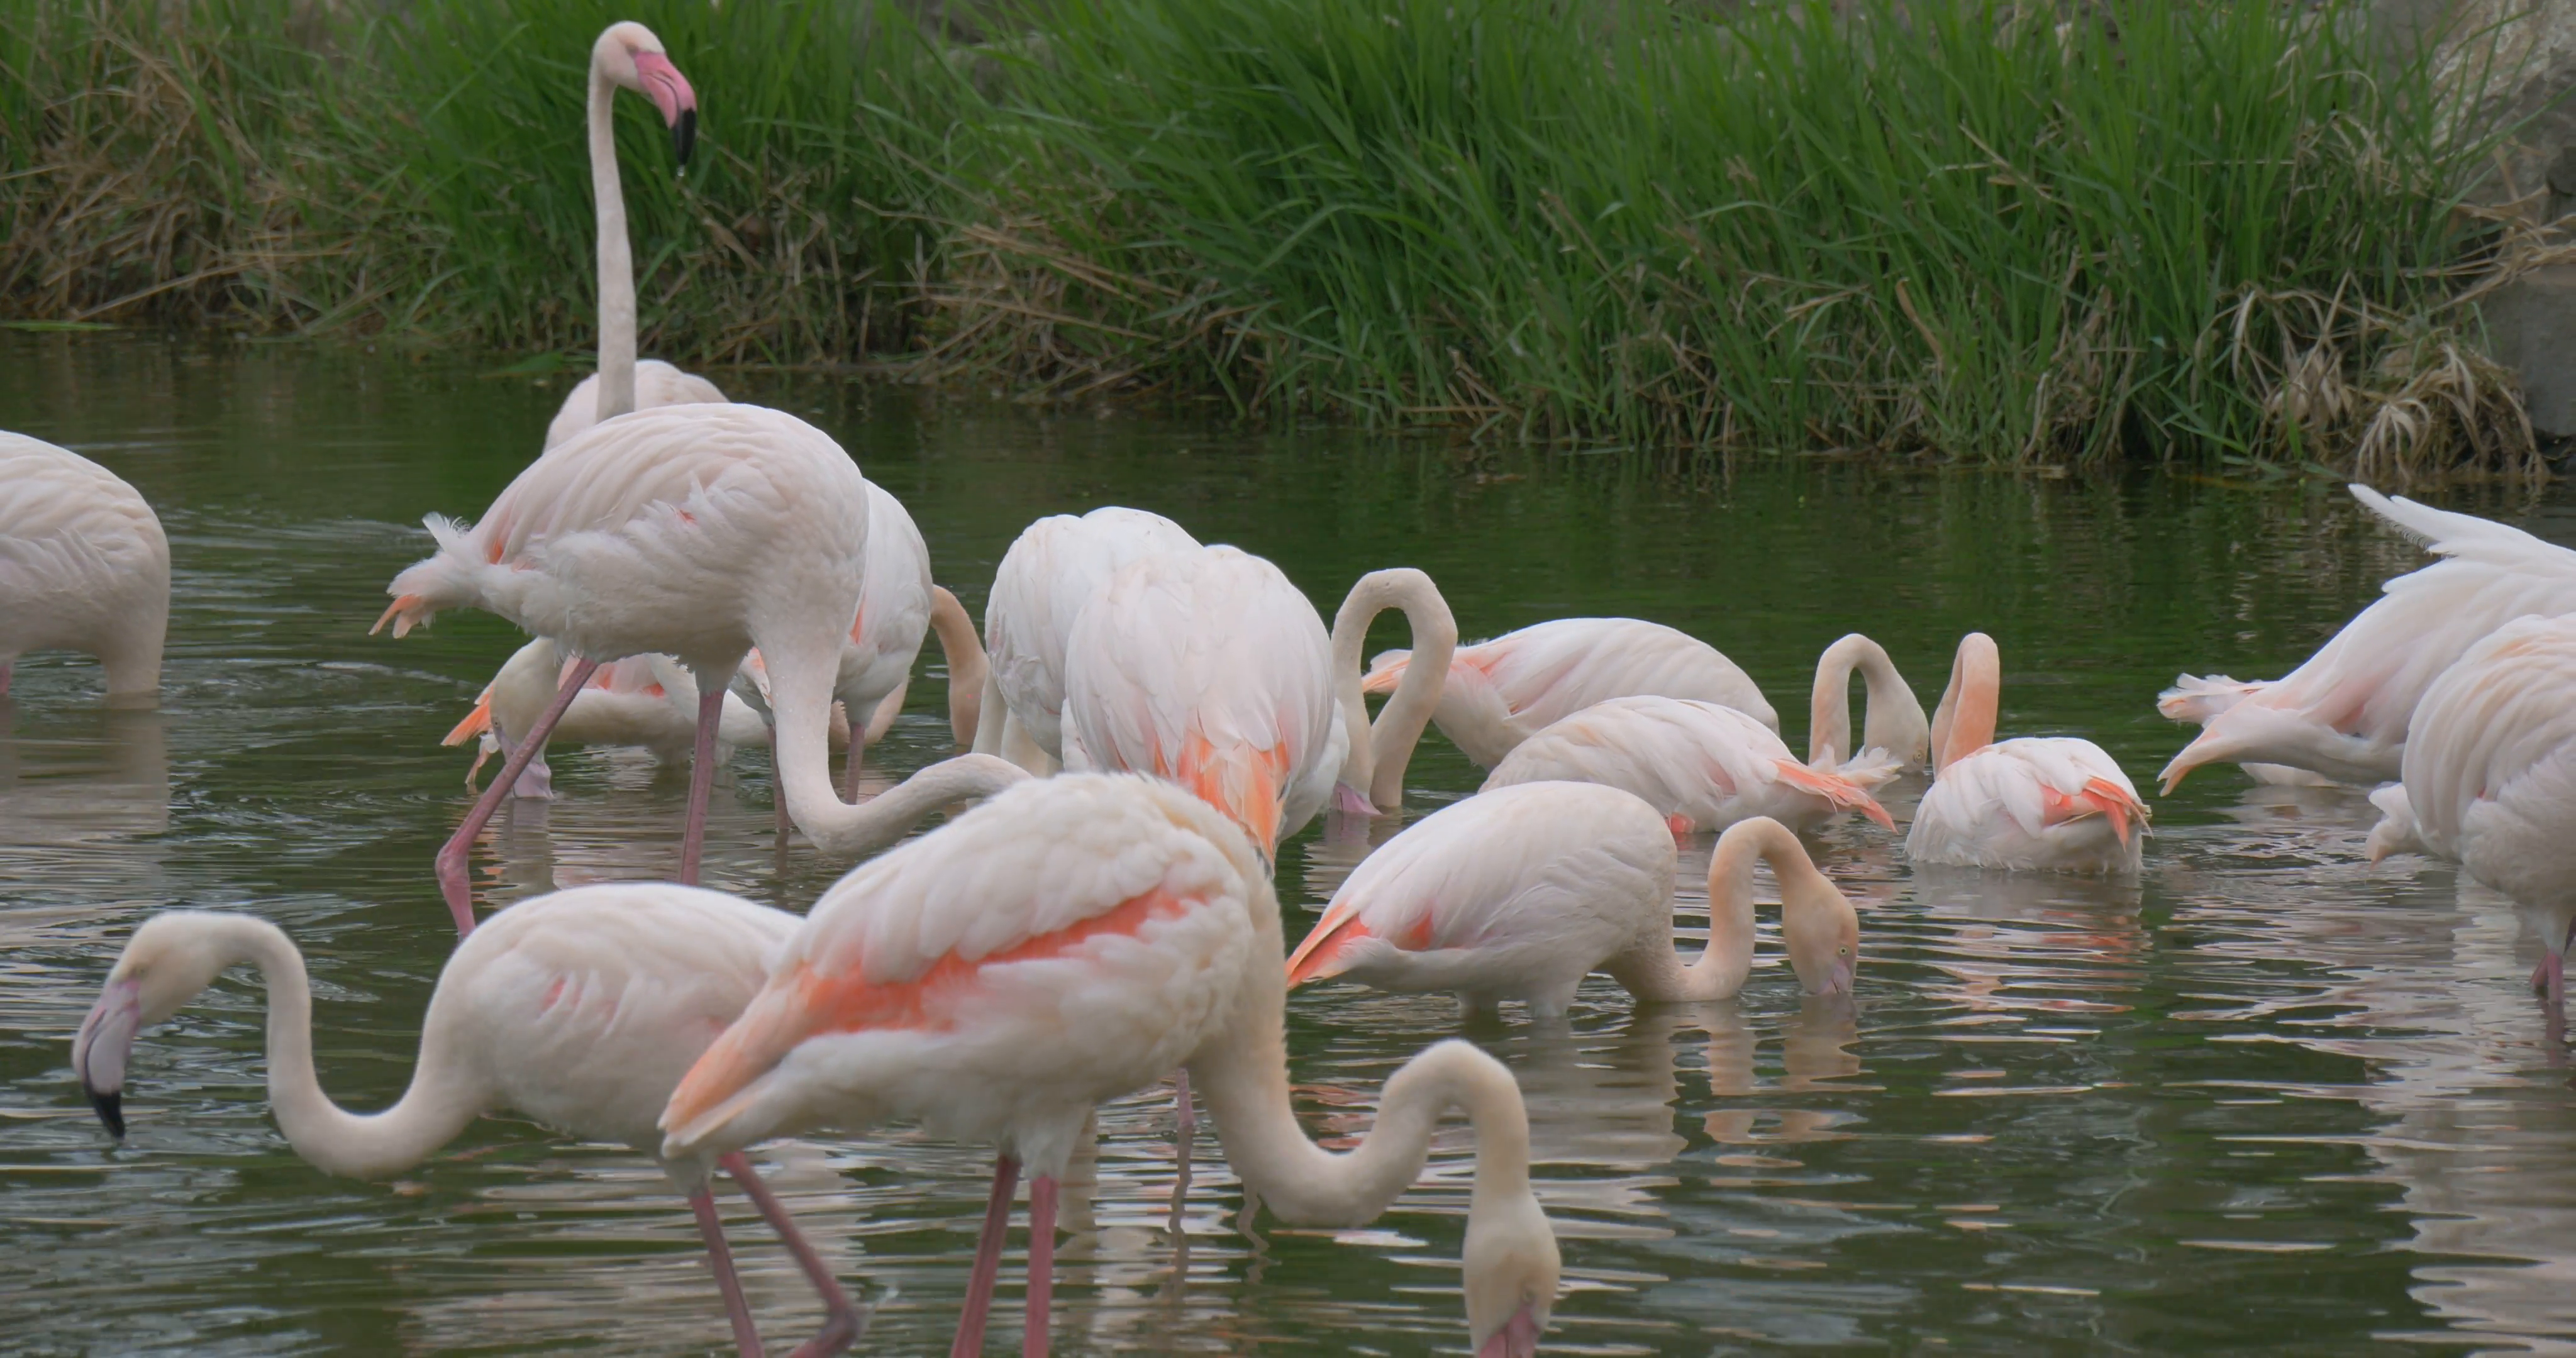 Group of Flamingos Resting in a Small Pond With Green Grass Stock ...